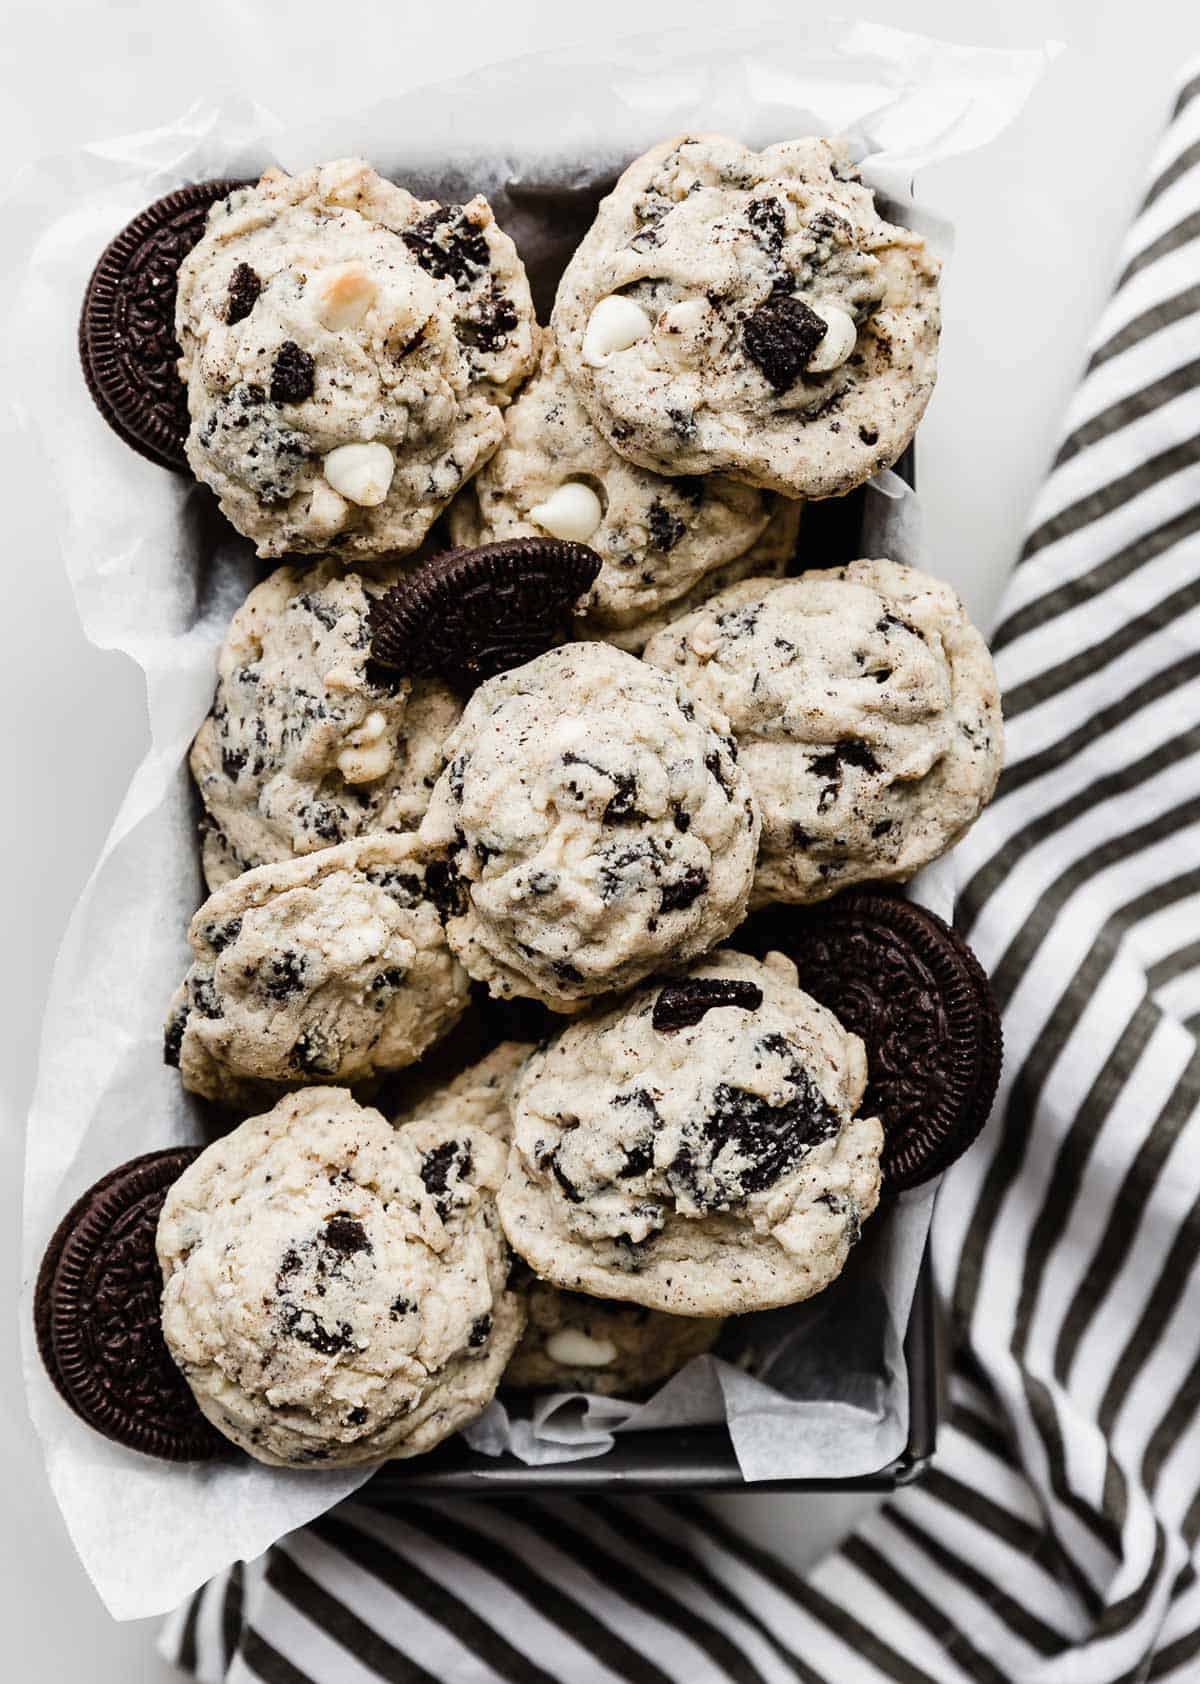 Cookies and Cream Cookies stacked on top of each other on a rectangular bread pan.